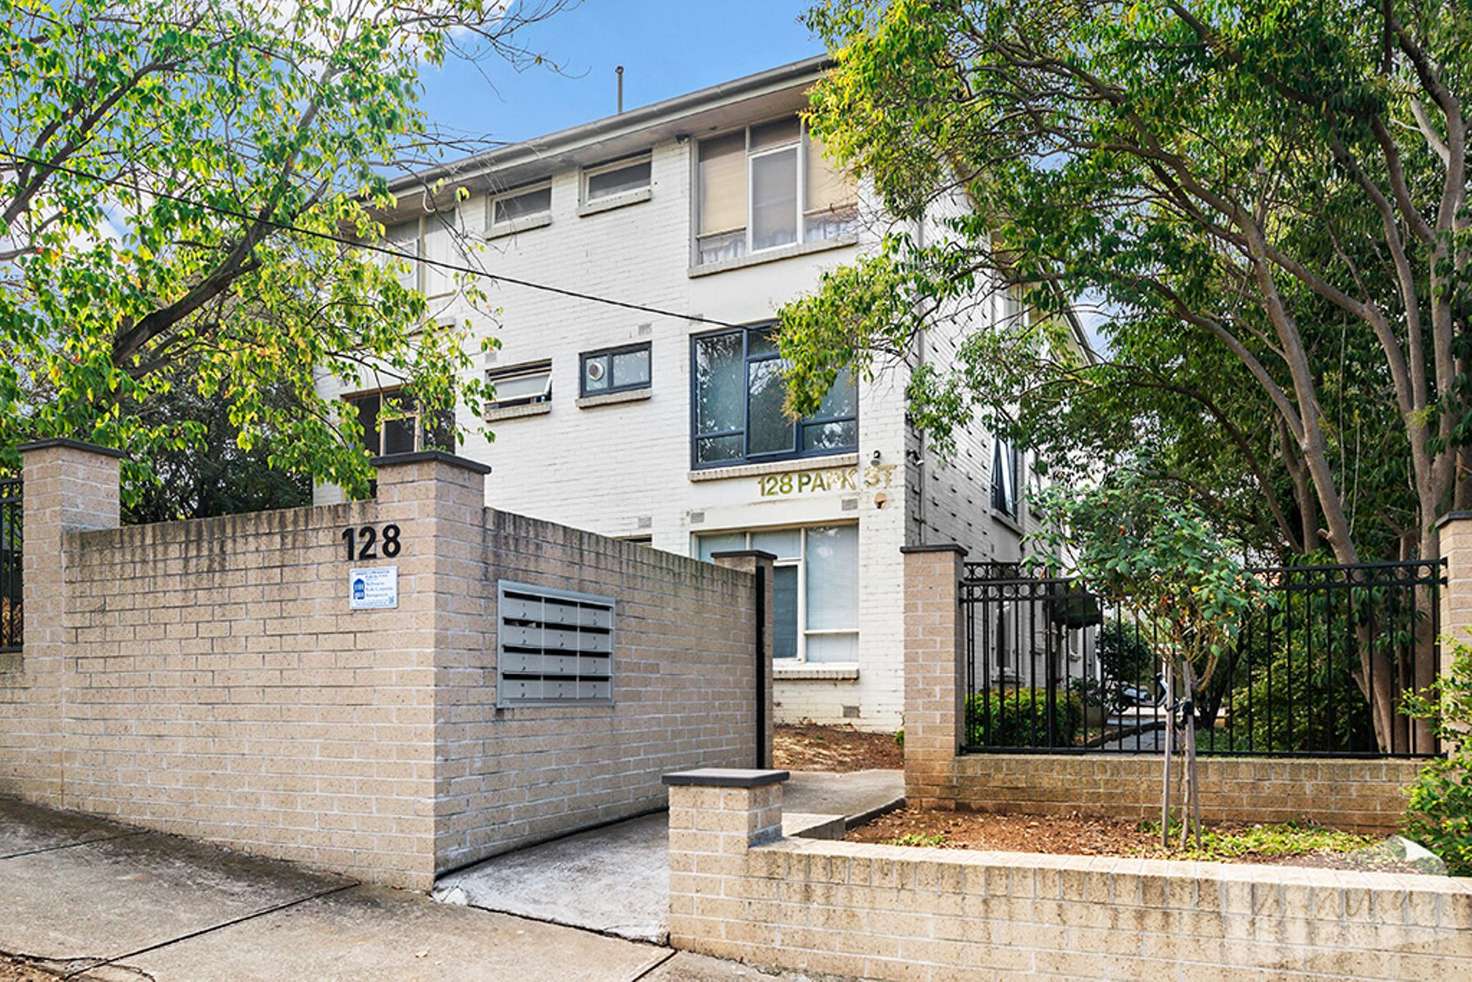 Main view of Homely apartment listing, 5/128 Park Street, Moonee Ponds VIC 3039